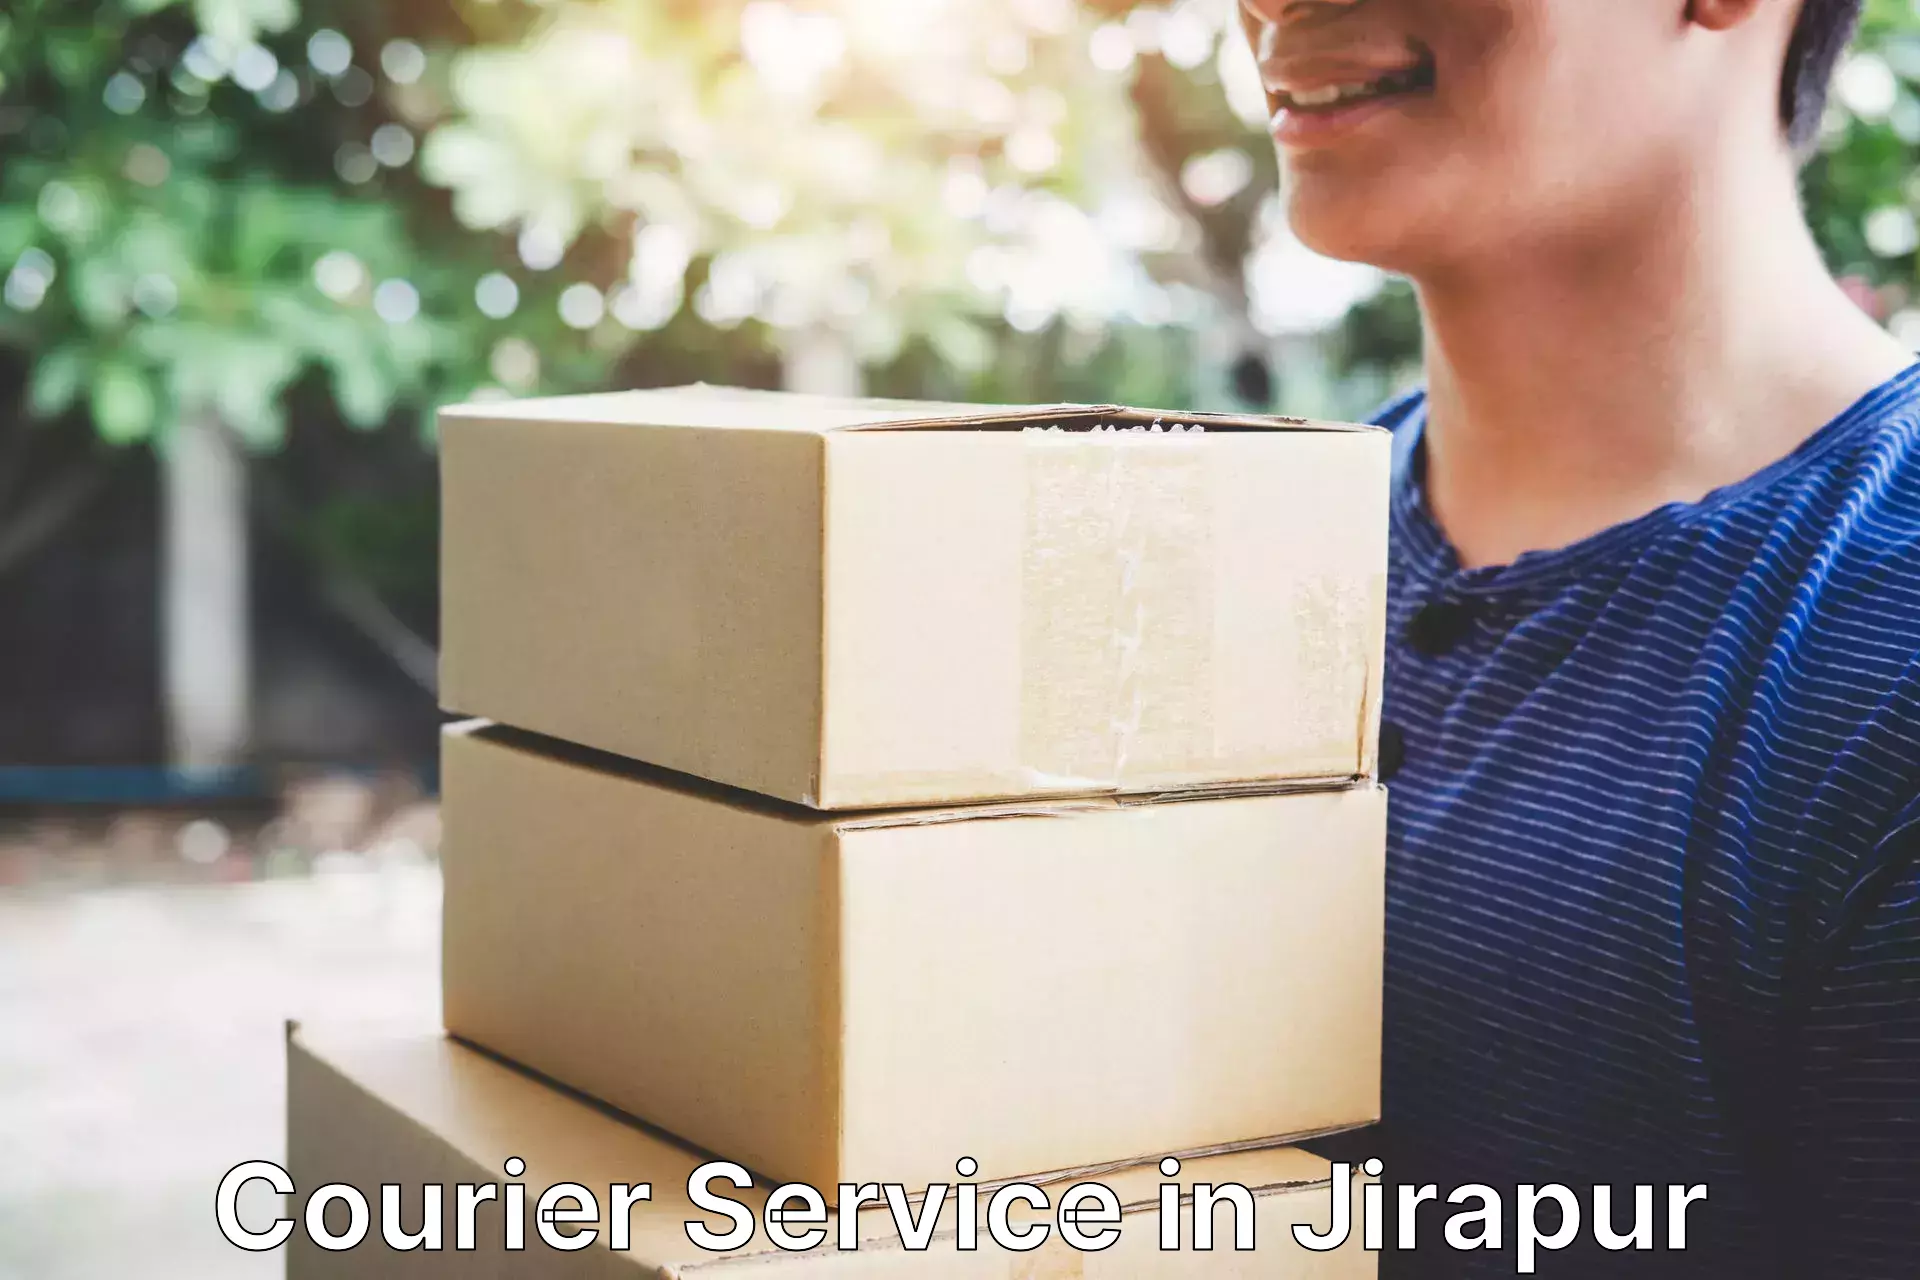 Efficient courier operations in Jirapur